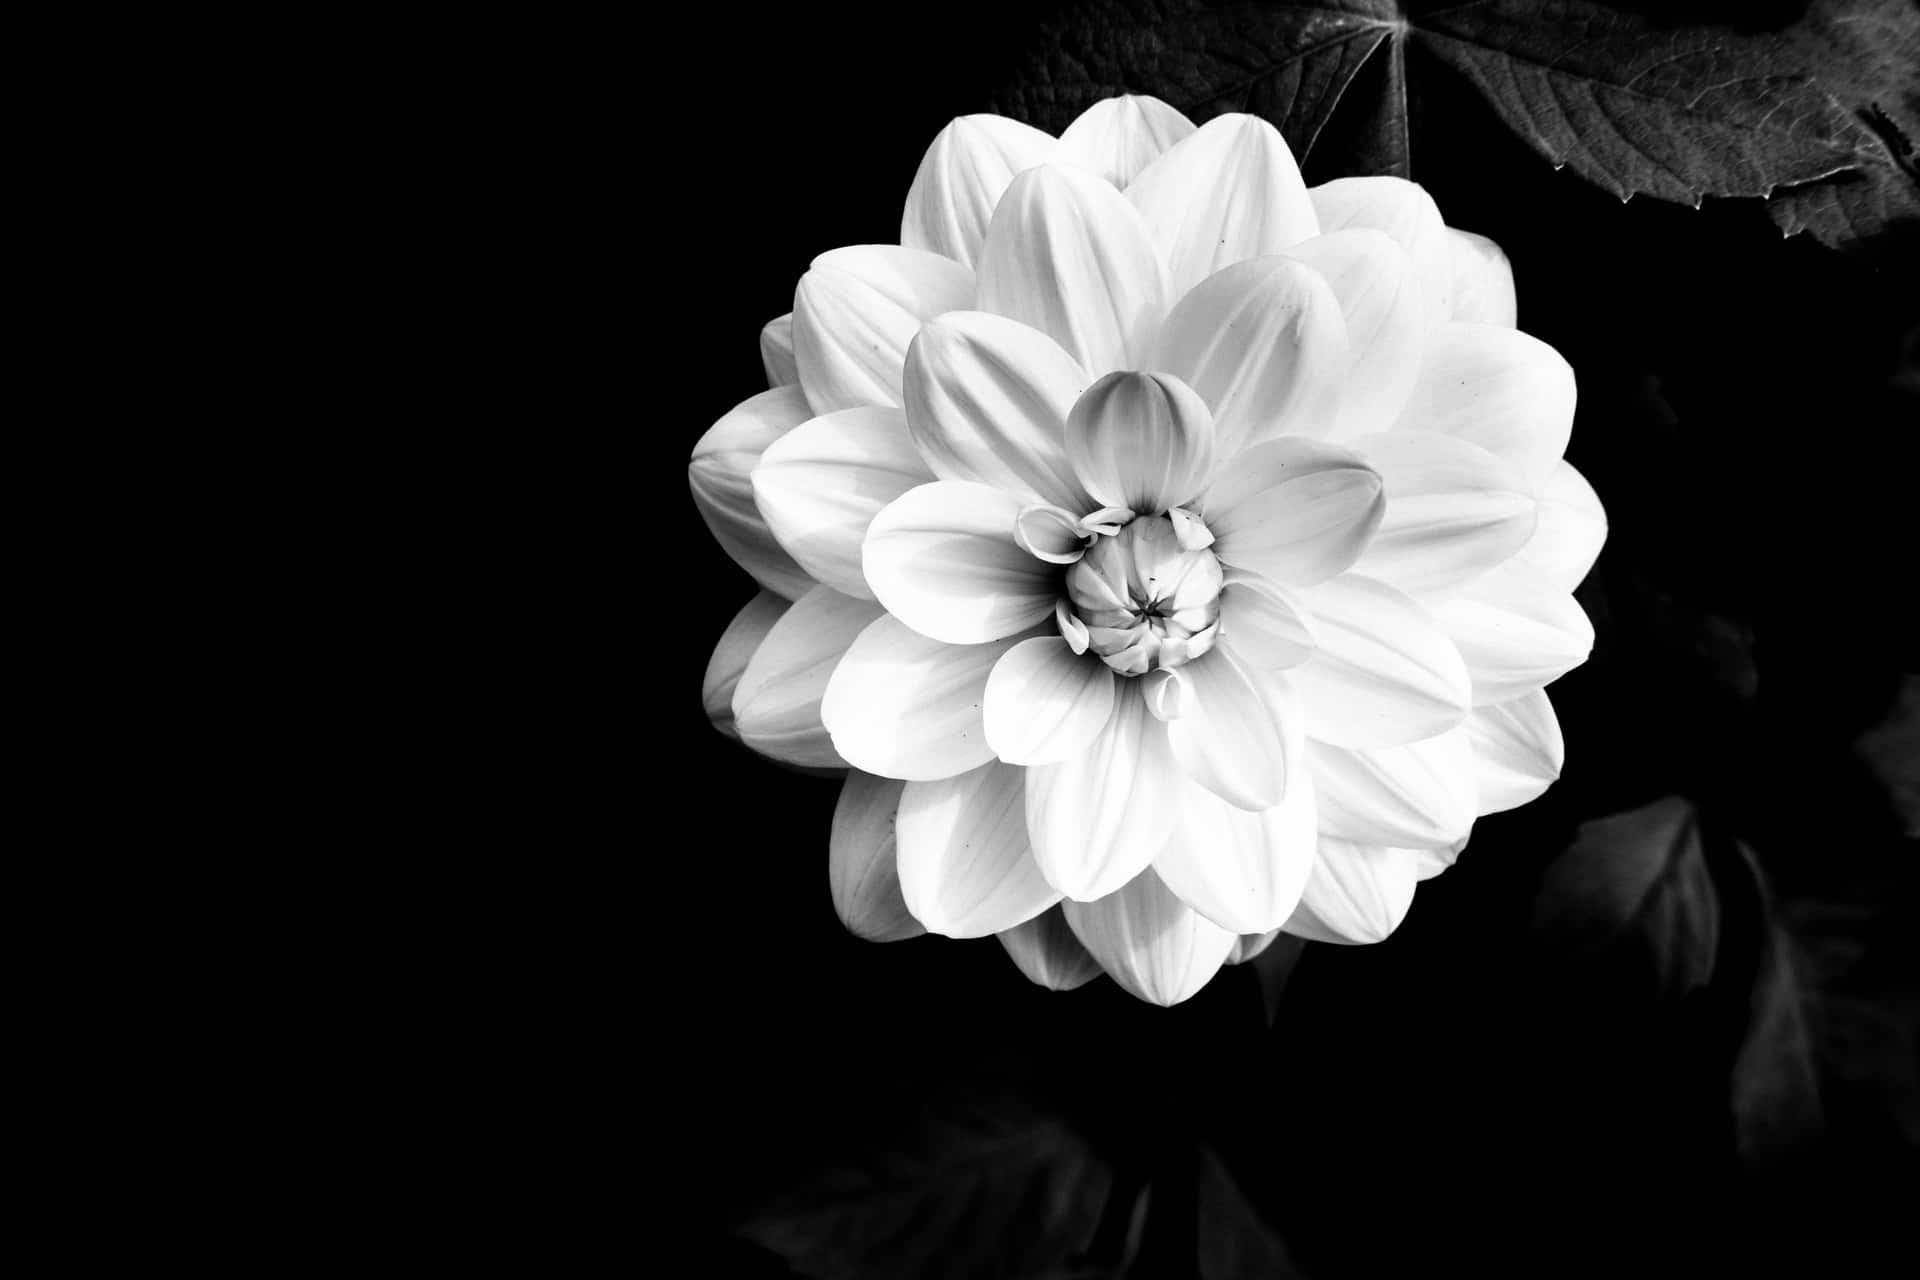 An Intricate Black and White Flower